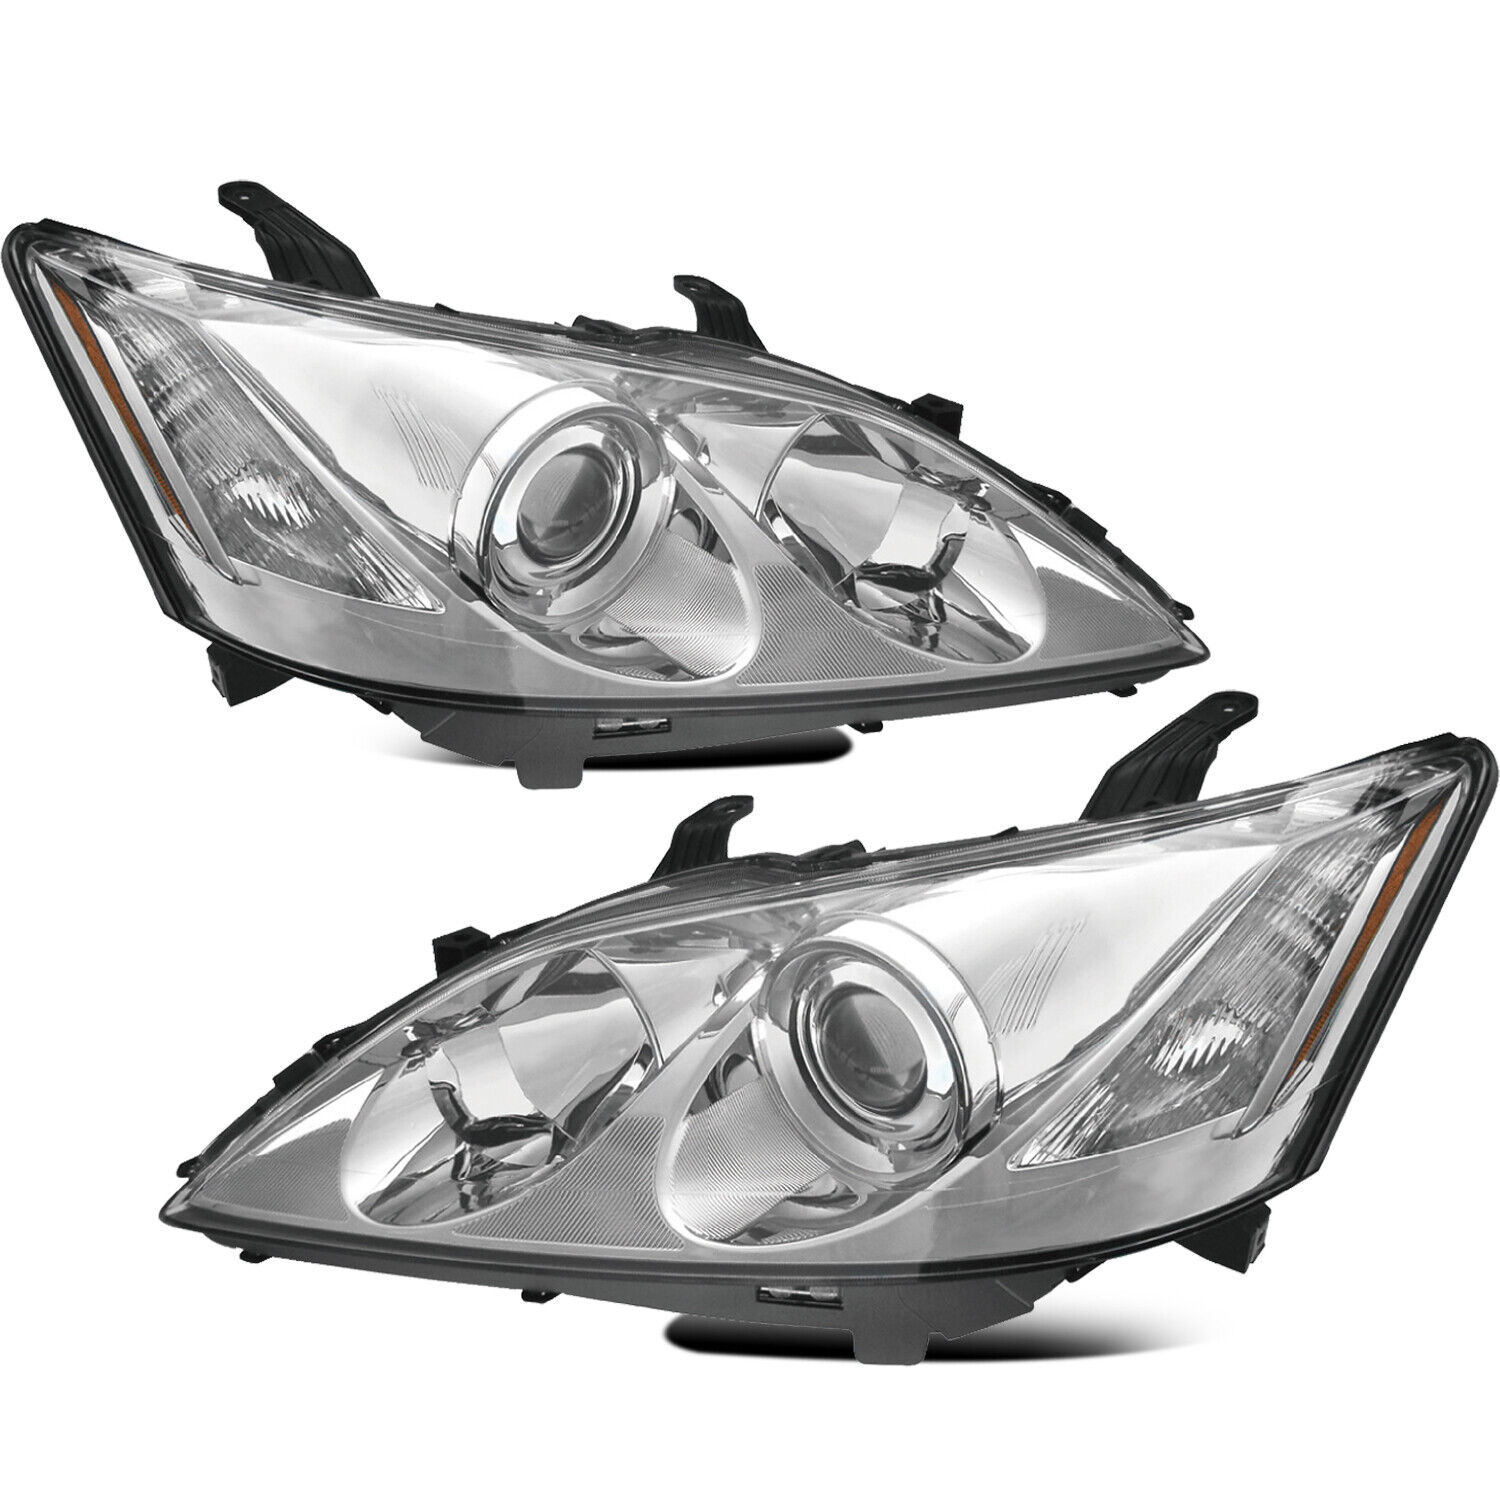 Headlights Assembly for 2007 2008 2009 Lexus ES350 Halogen Chrome Pairs Not HID